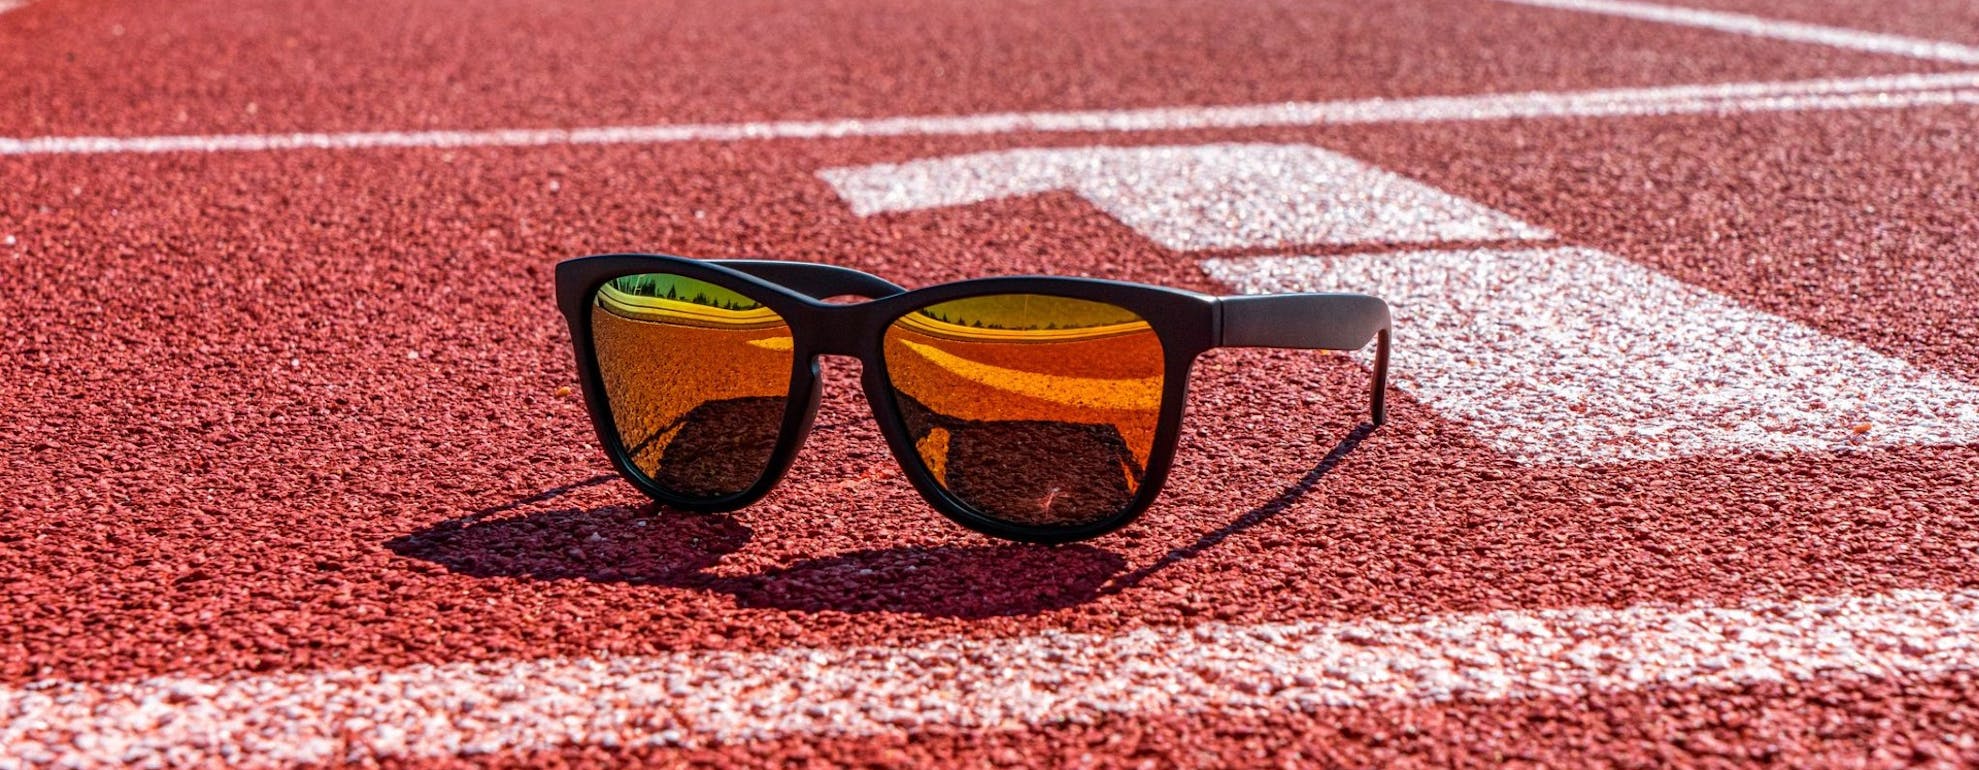 what-to-look-for-in-running-sunglasses